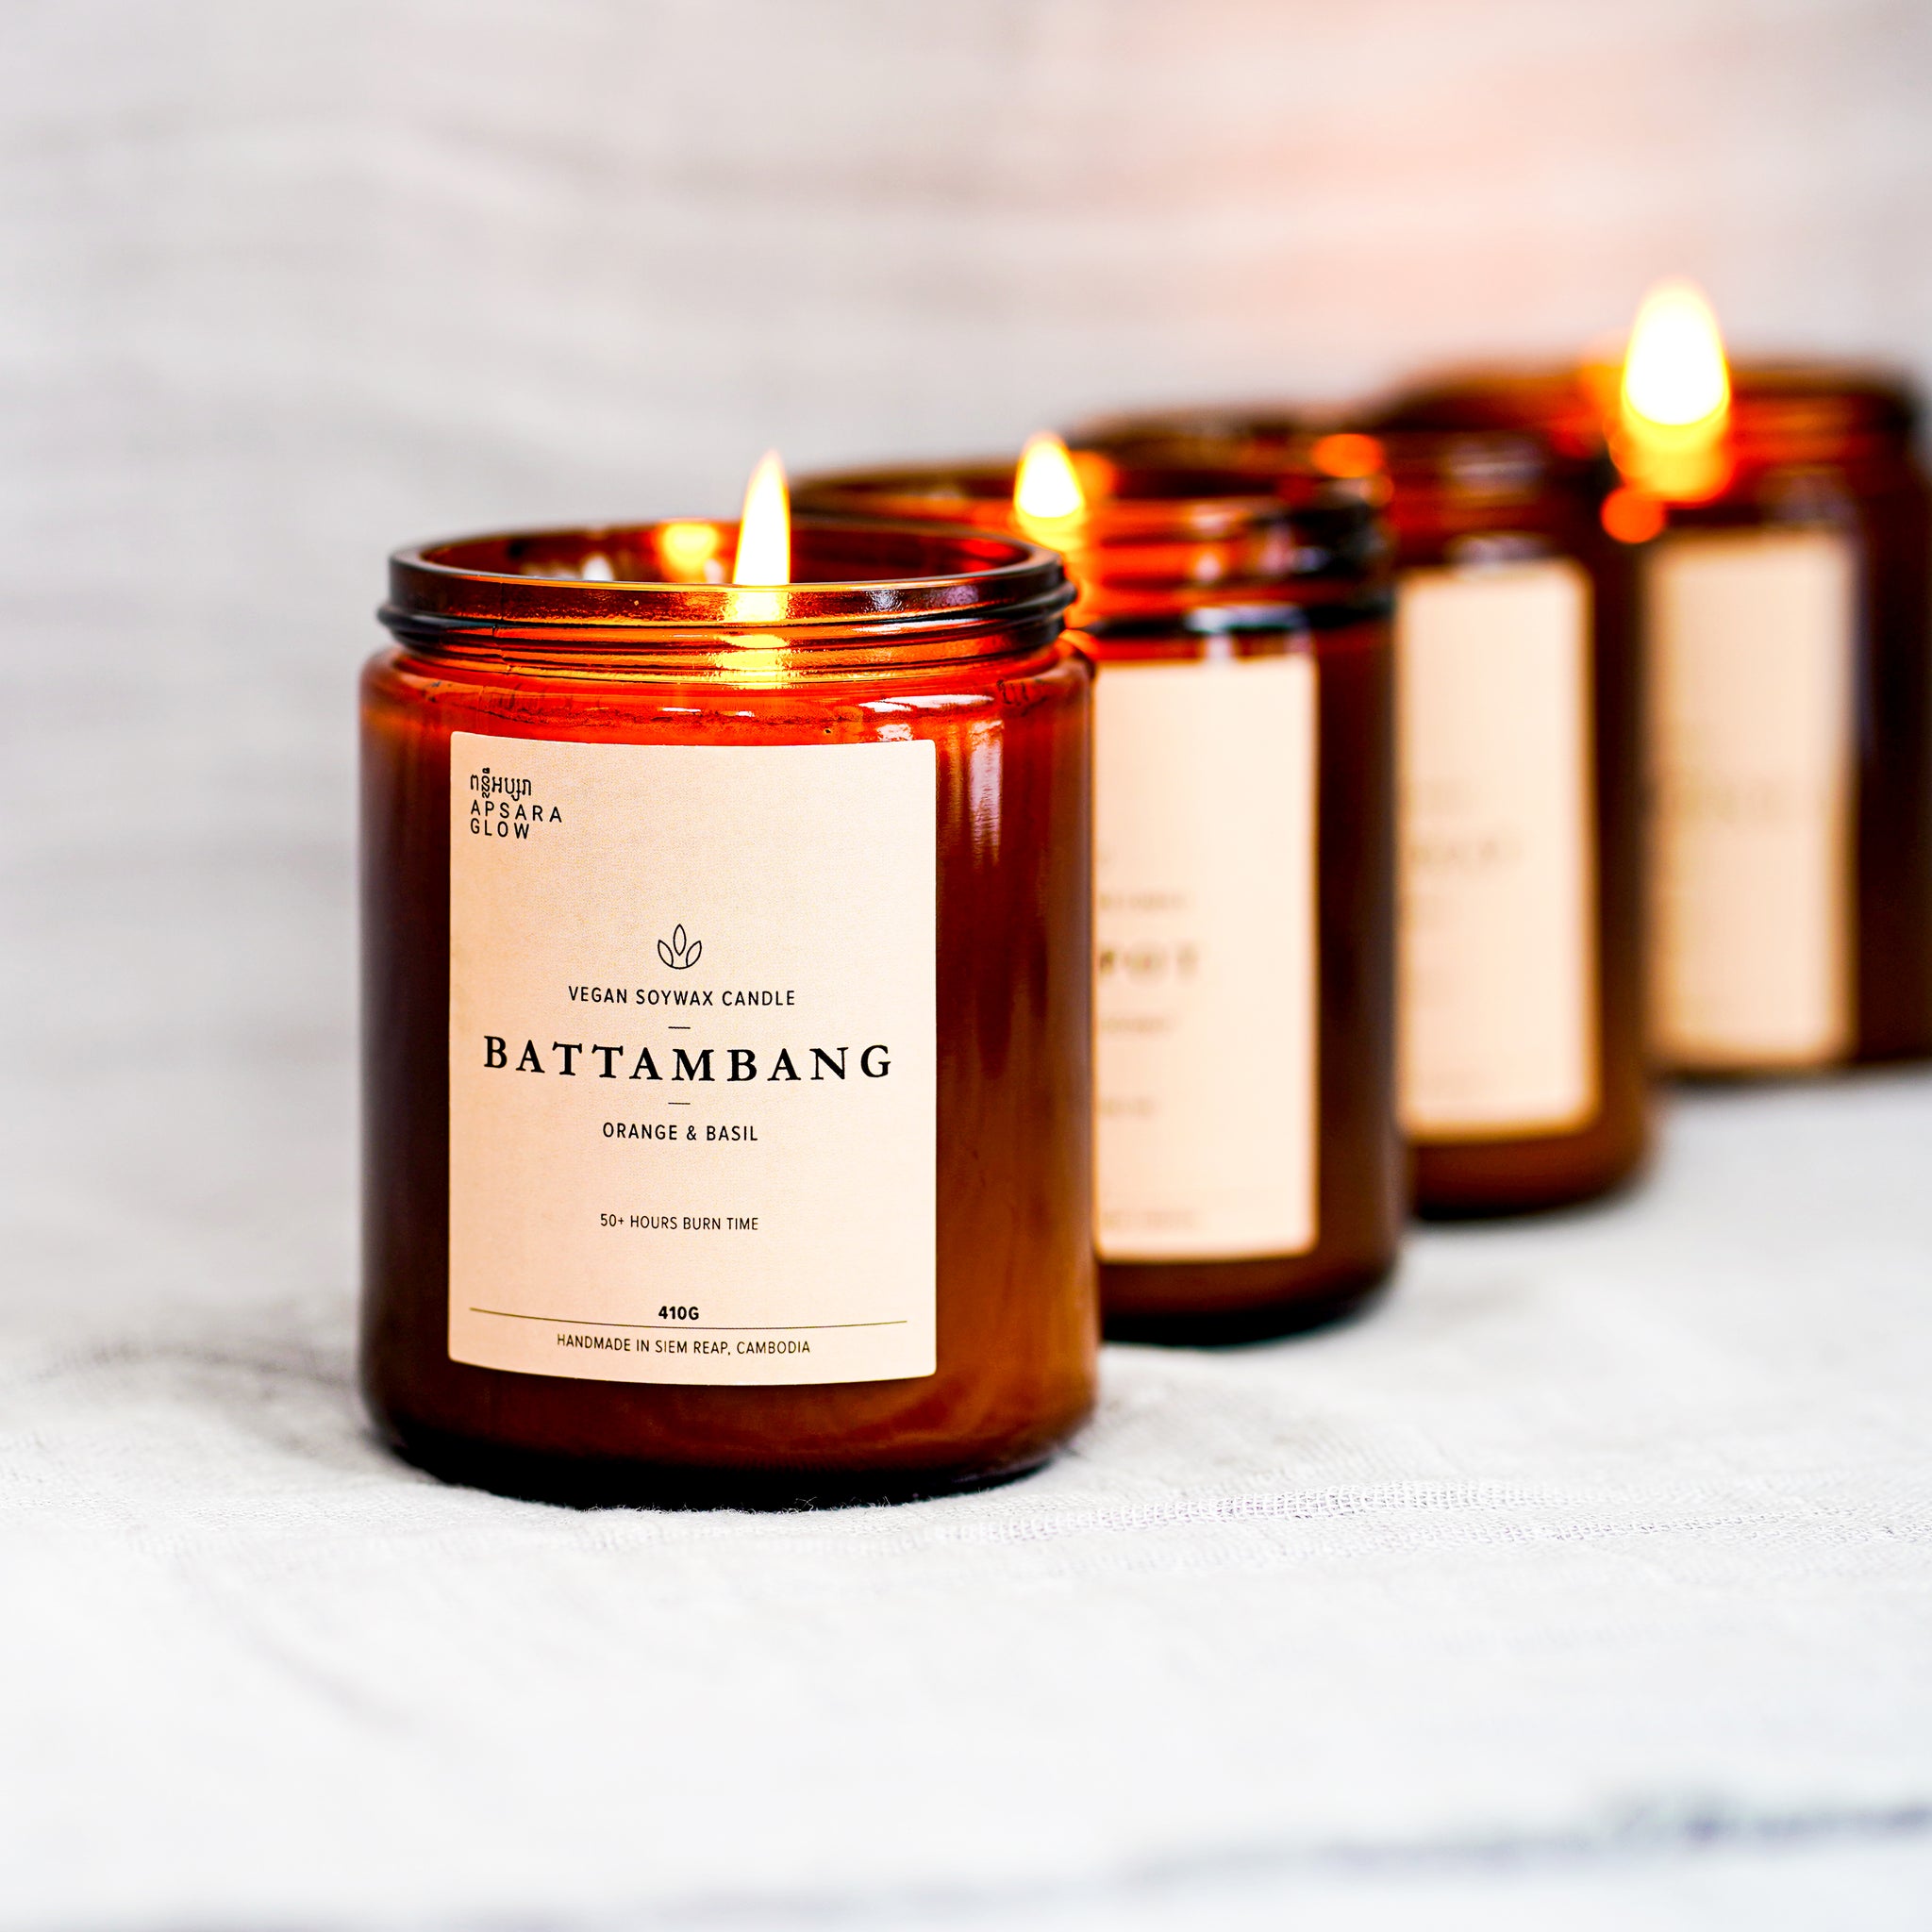 Fill your room with this delicious candle. This natural, vegan soy wax candle features citrus top notes of juicy orange and mandarin with local basil essential oil to add a spicy edge. It is inspired by the city of Battambang, famously known as the ‘rice bowl ‘ of Cambodia.